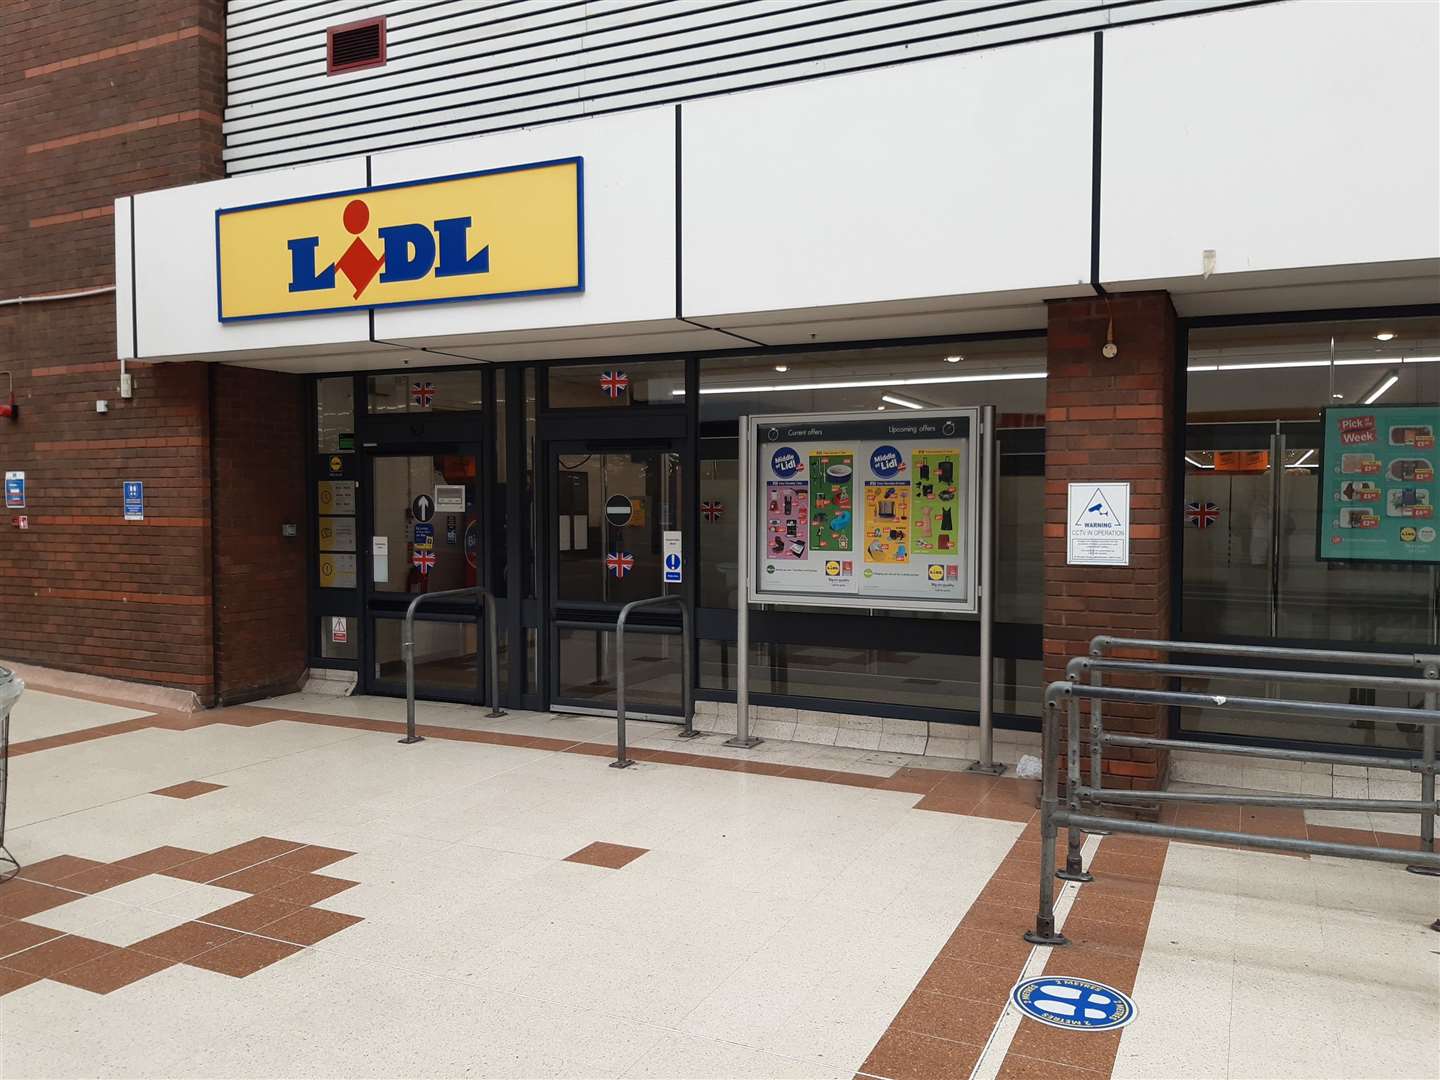 The former Lidl store in the Broadway Shopping Centre, Maidstone